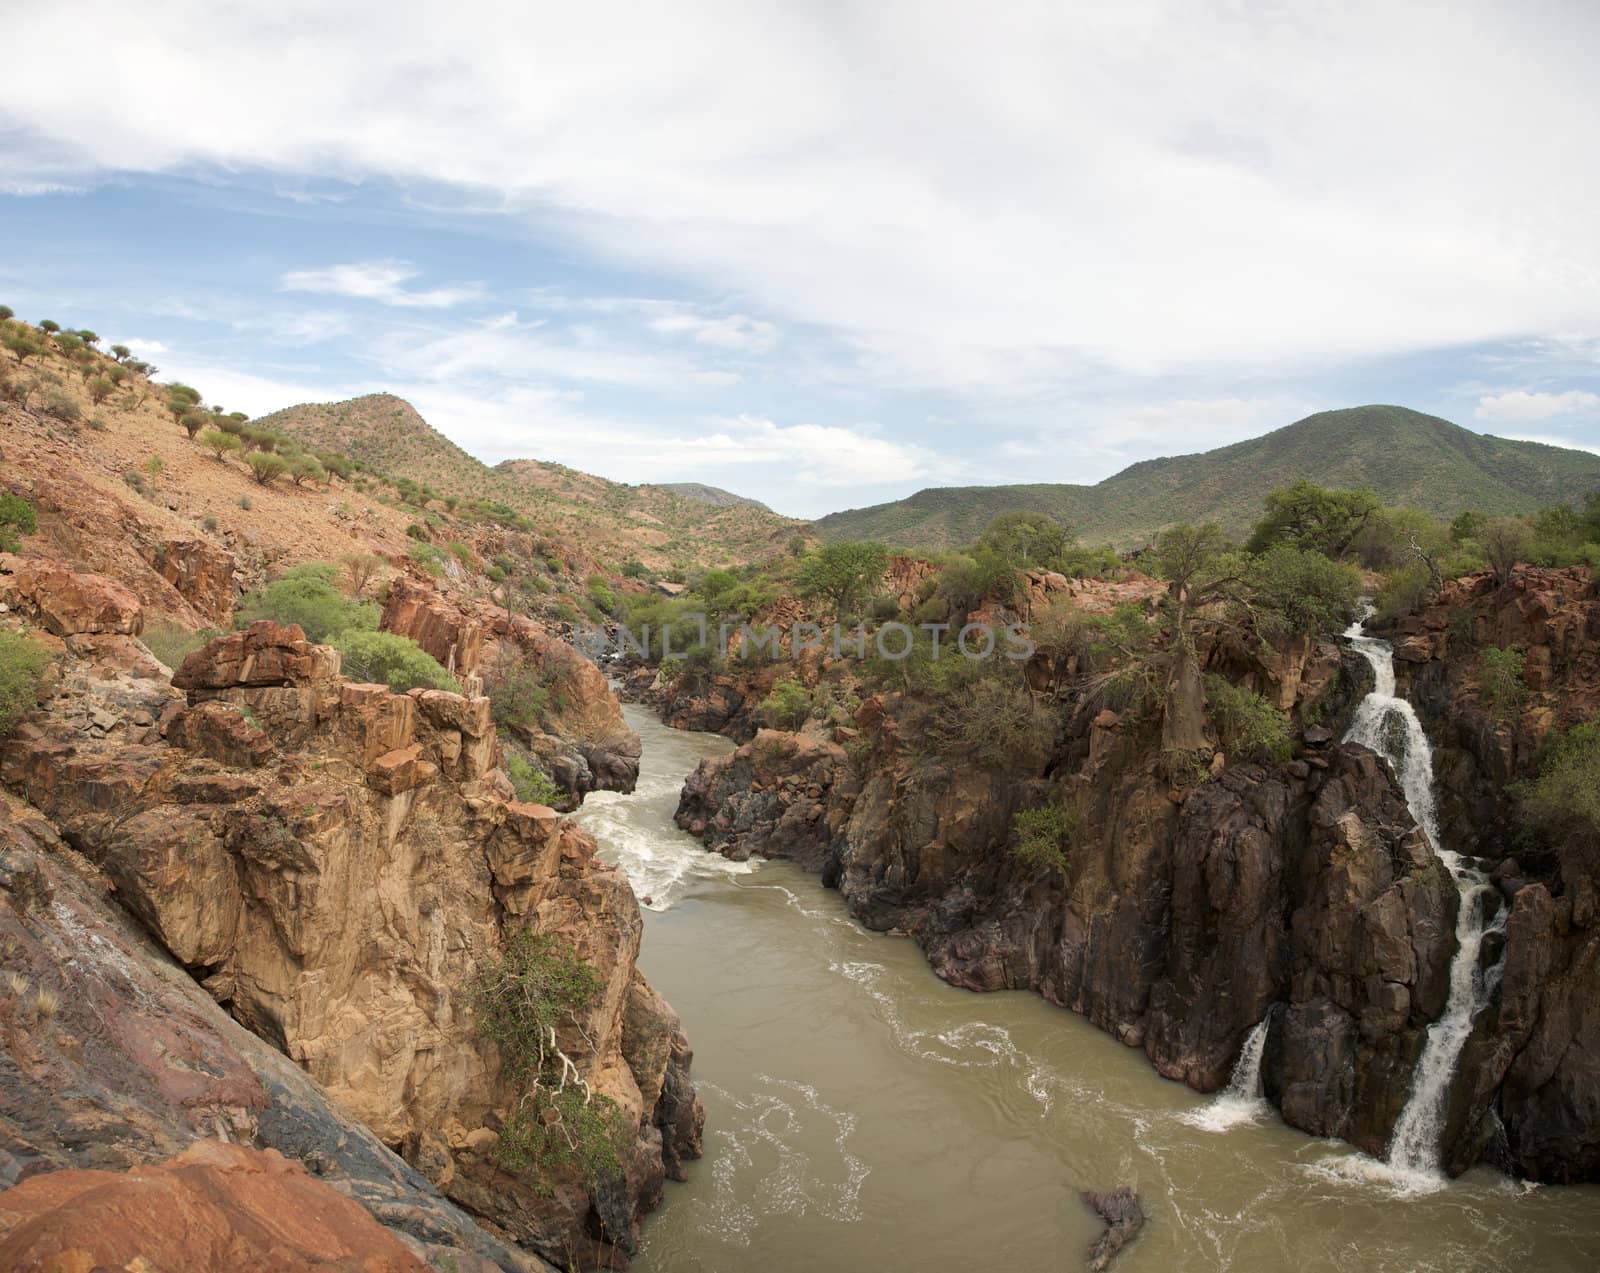 The Epupa Falls lie on the Kunene River, on the border of Angola and Namibia